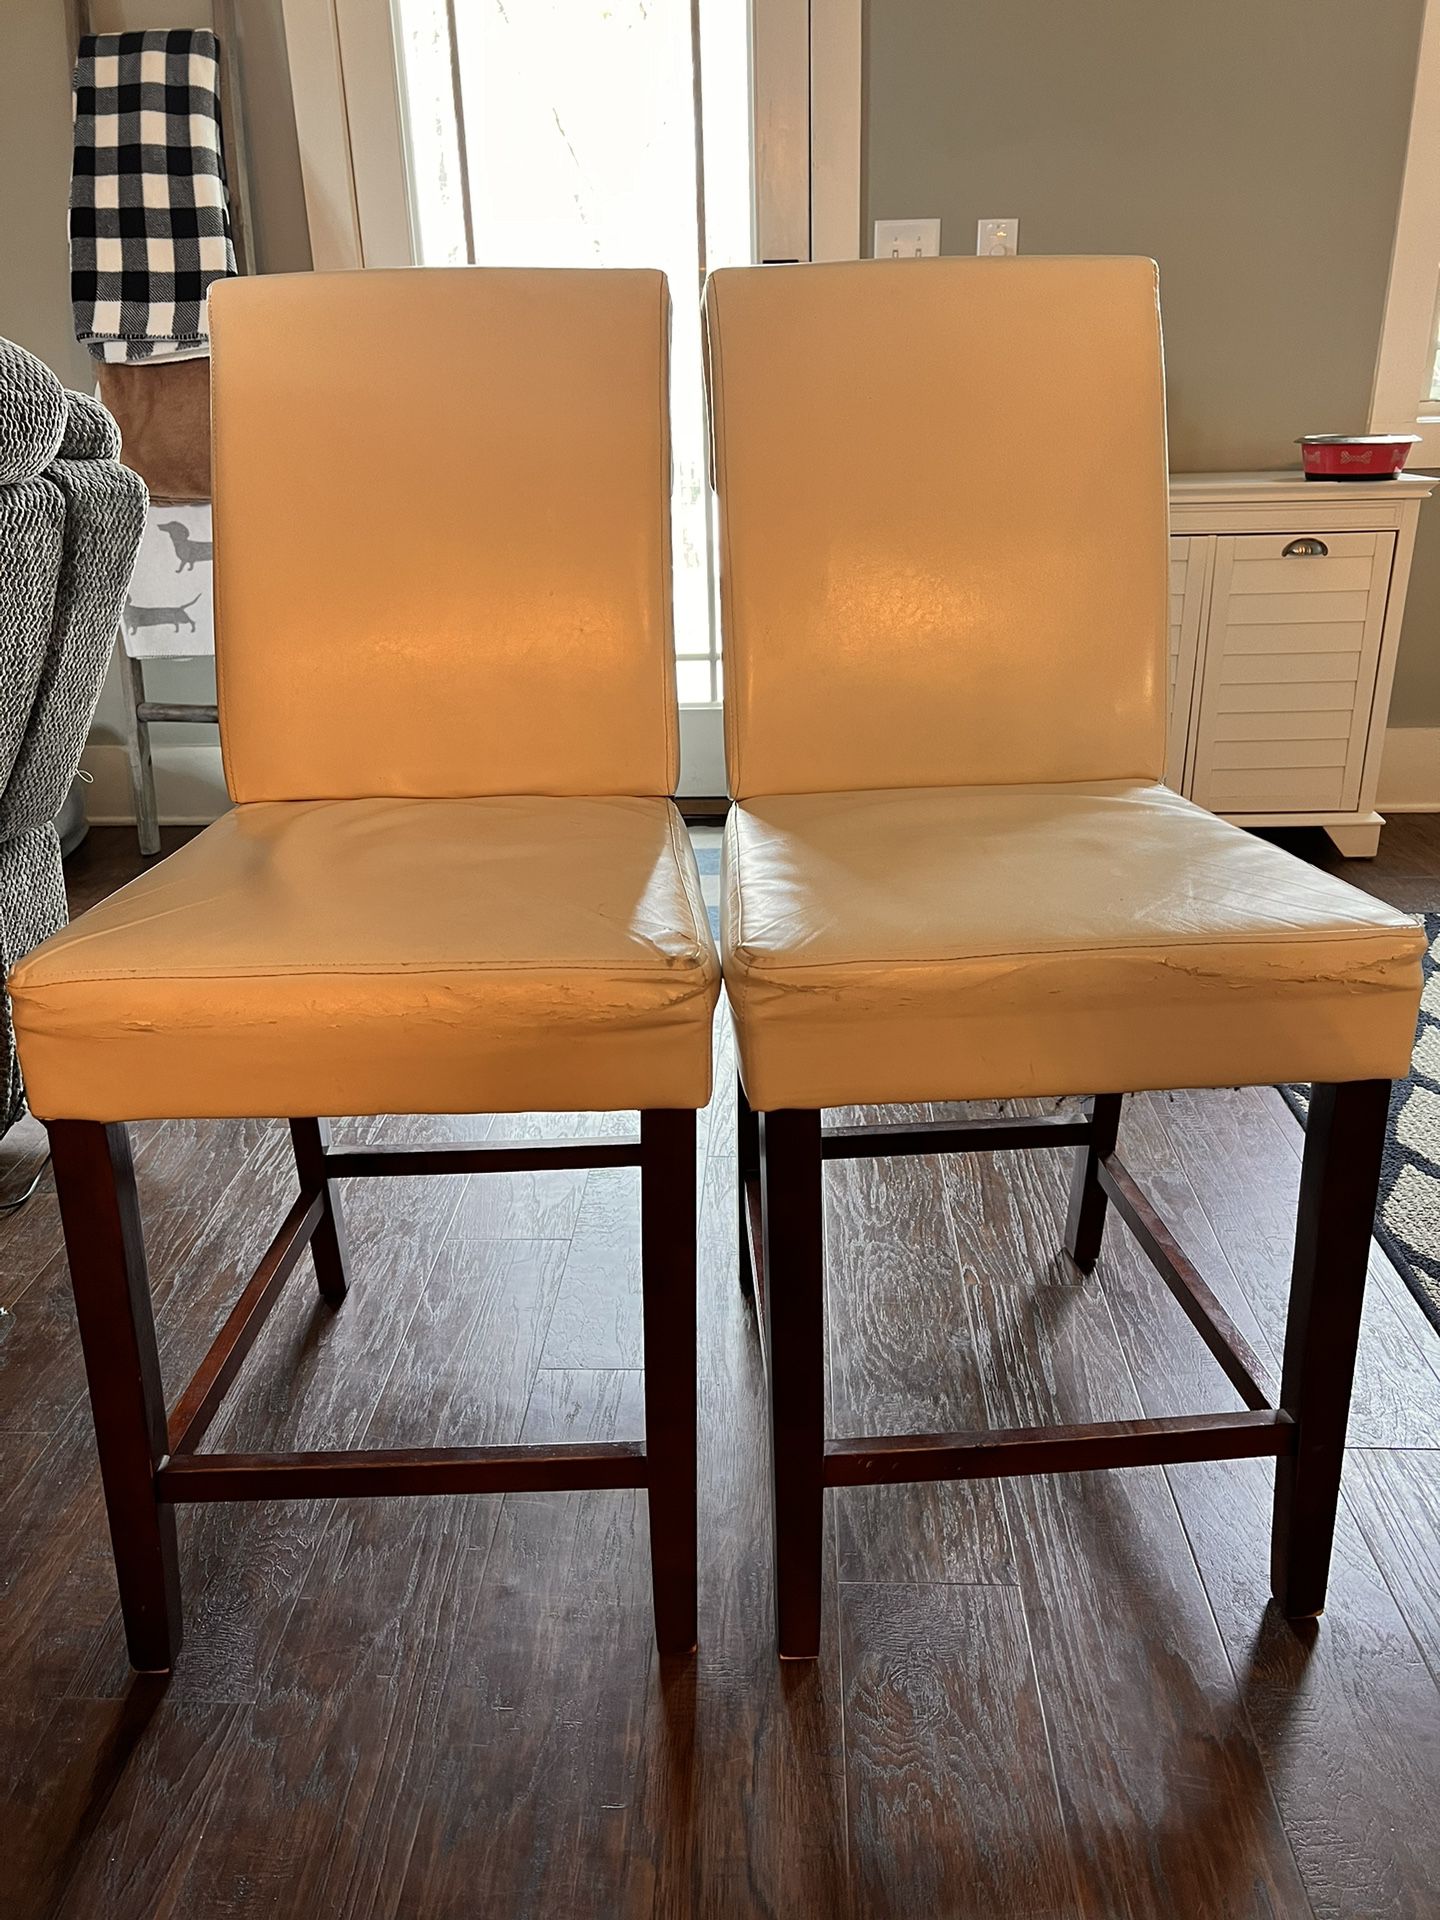 Set of Four Counter Height Stools